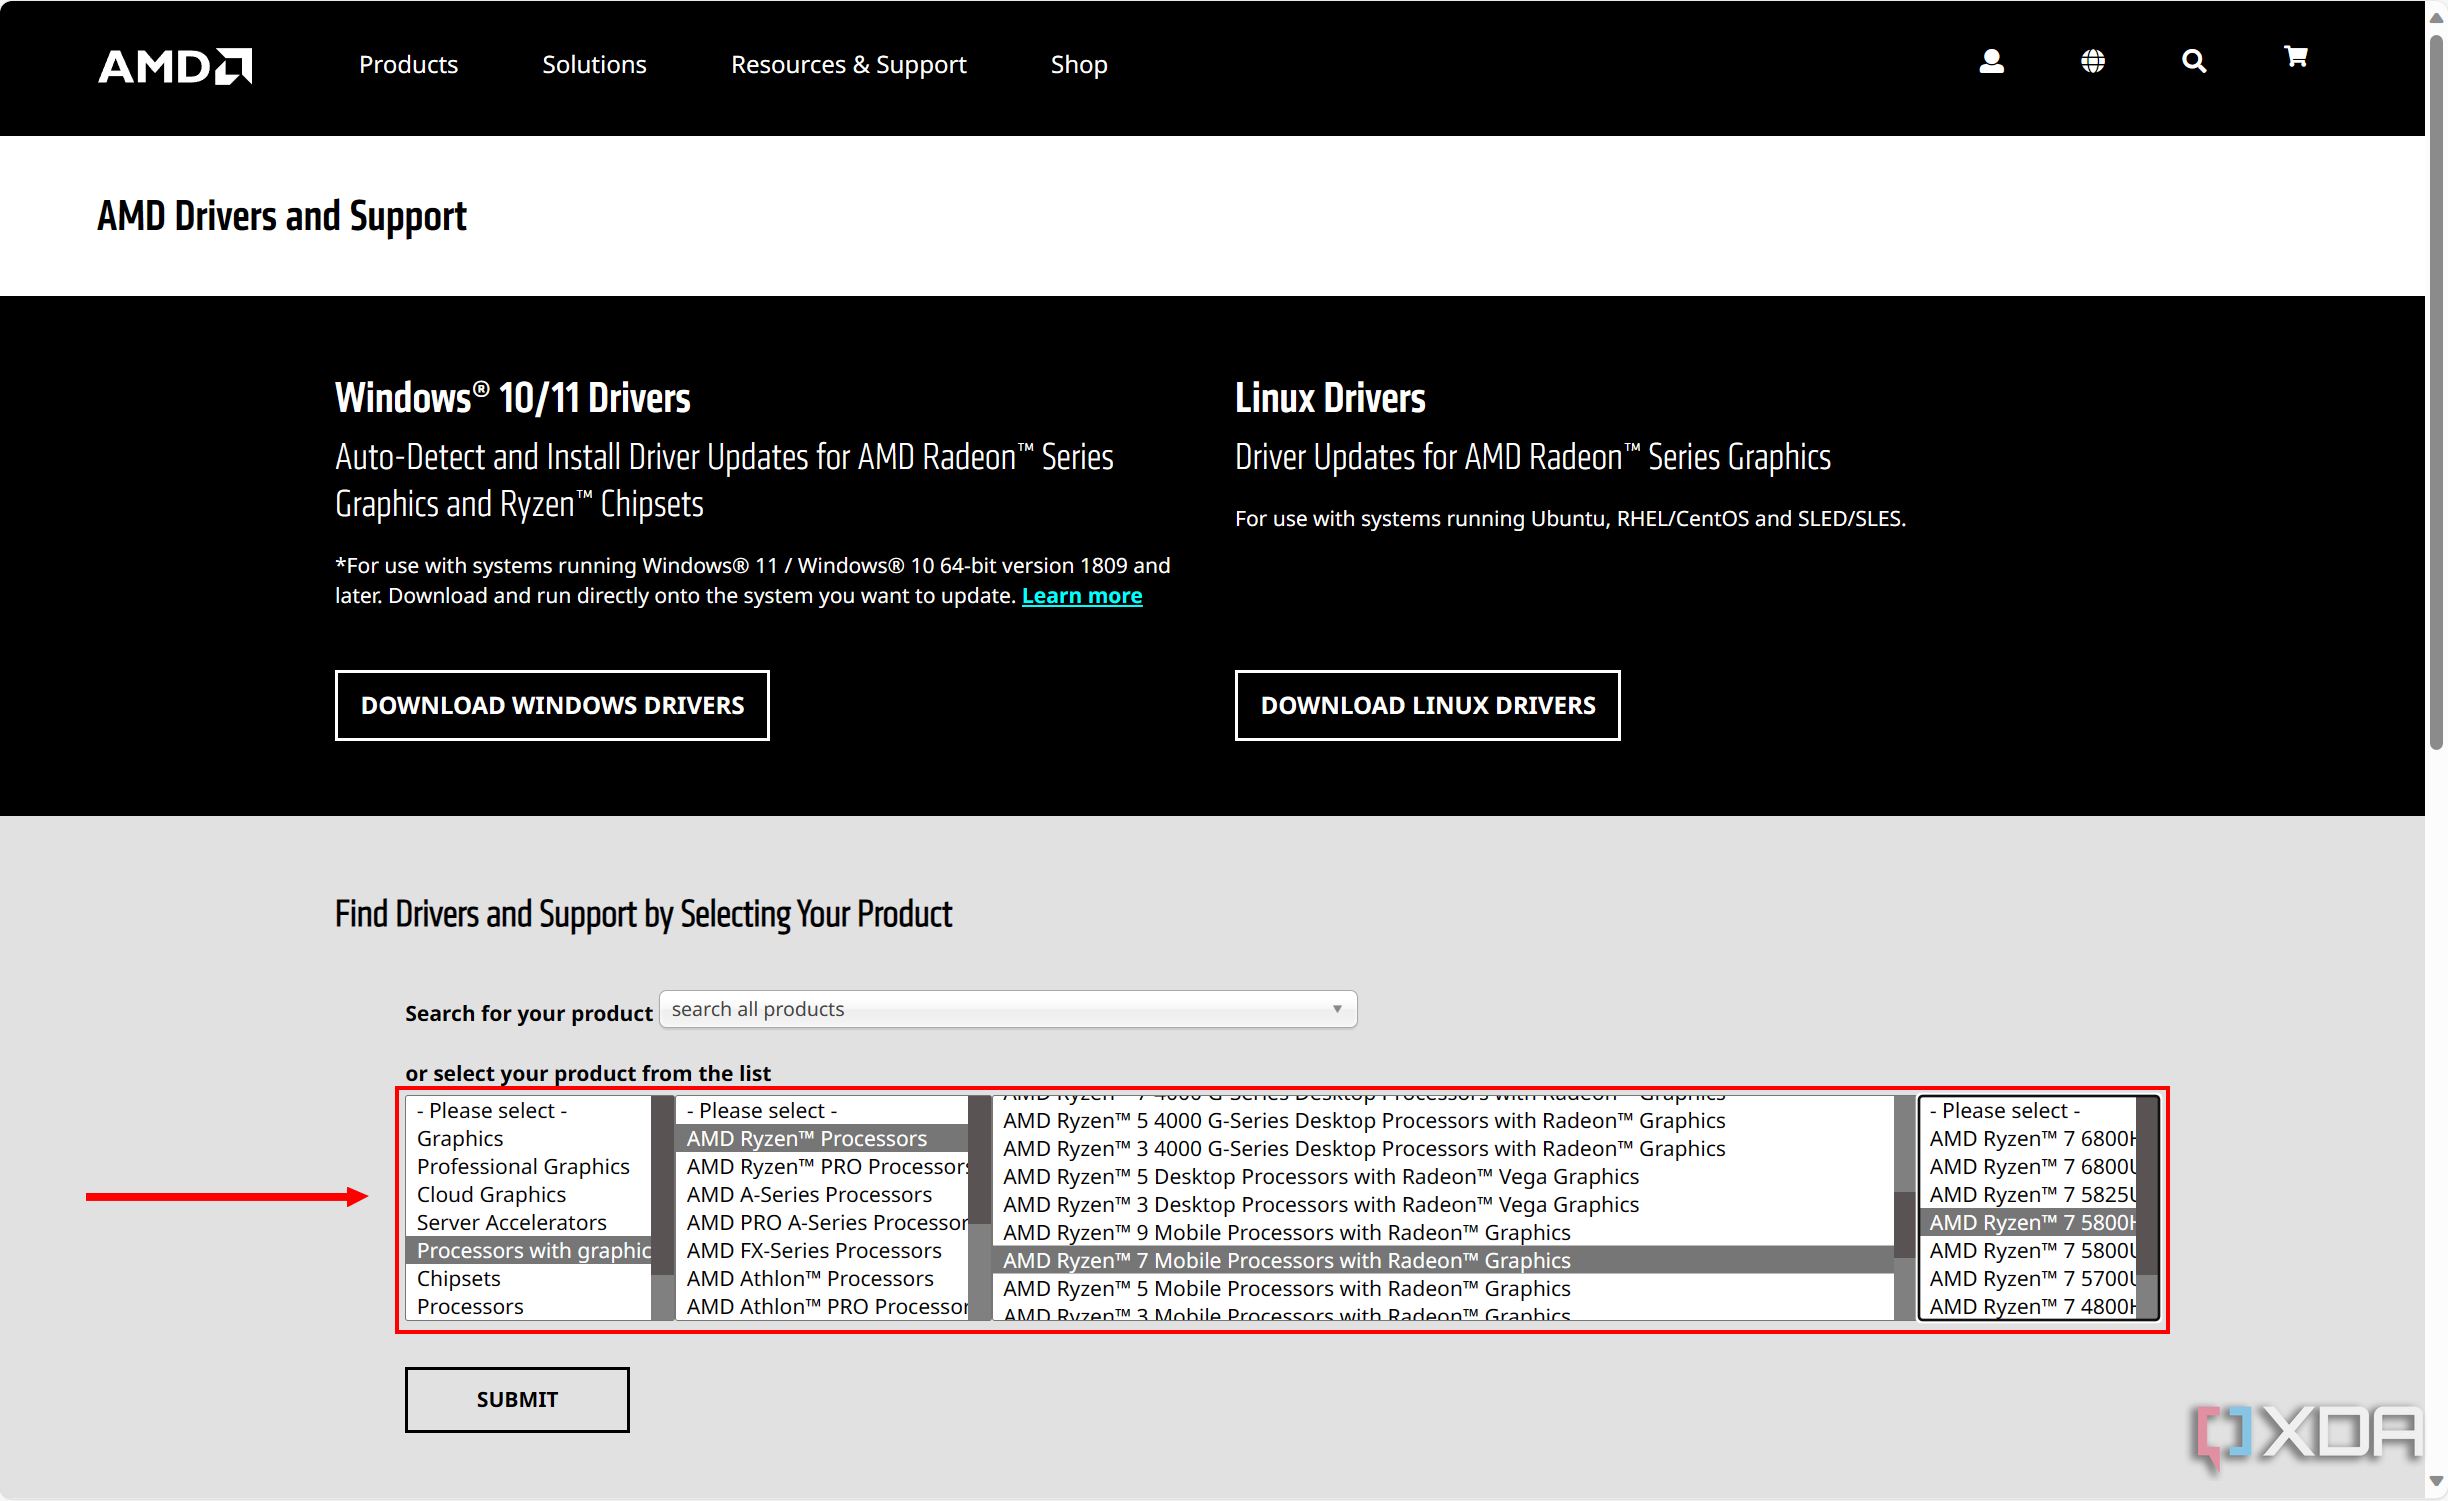 Screenshot of the AMD support website when selecting a product for which to download drivers.